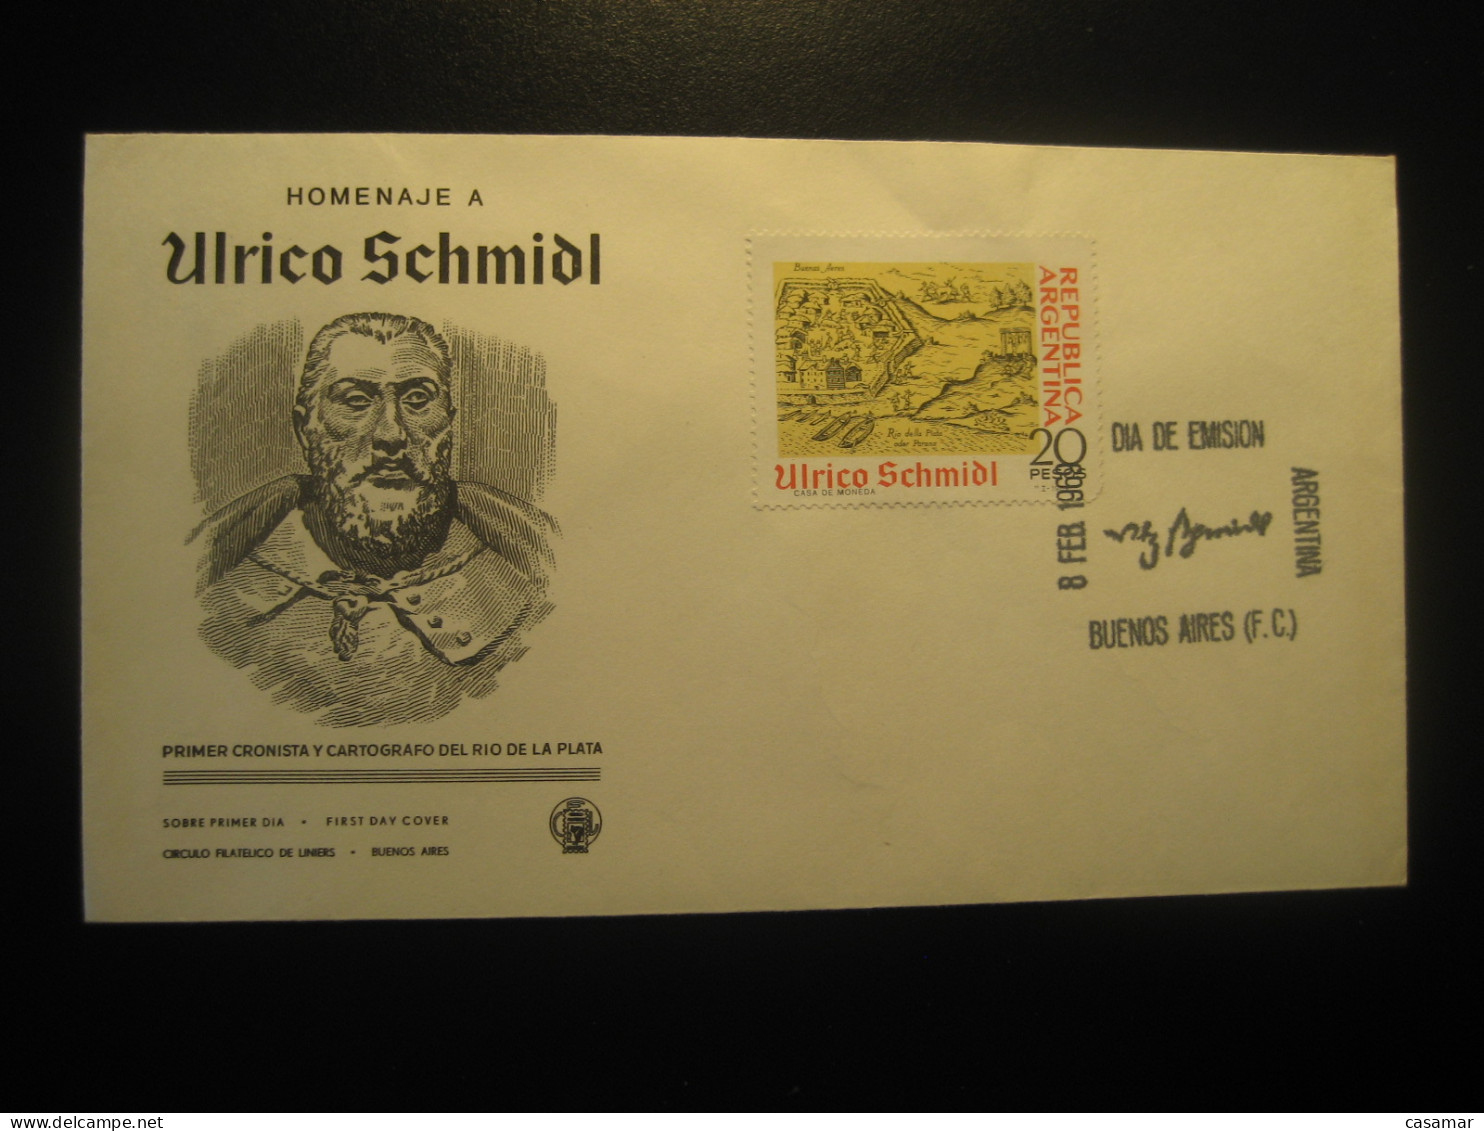 1969 Ulrico Schmidl Cartografo Cartography Cartographie Mapping Geography FDC Cancel Cover ARGENTINA Buenos Aires - Geography